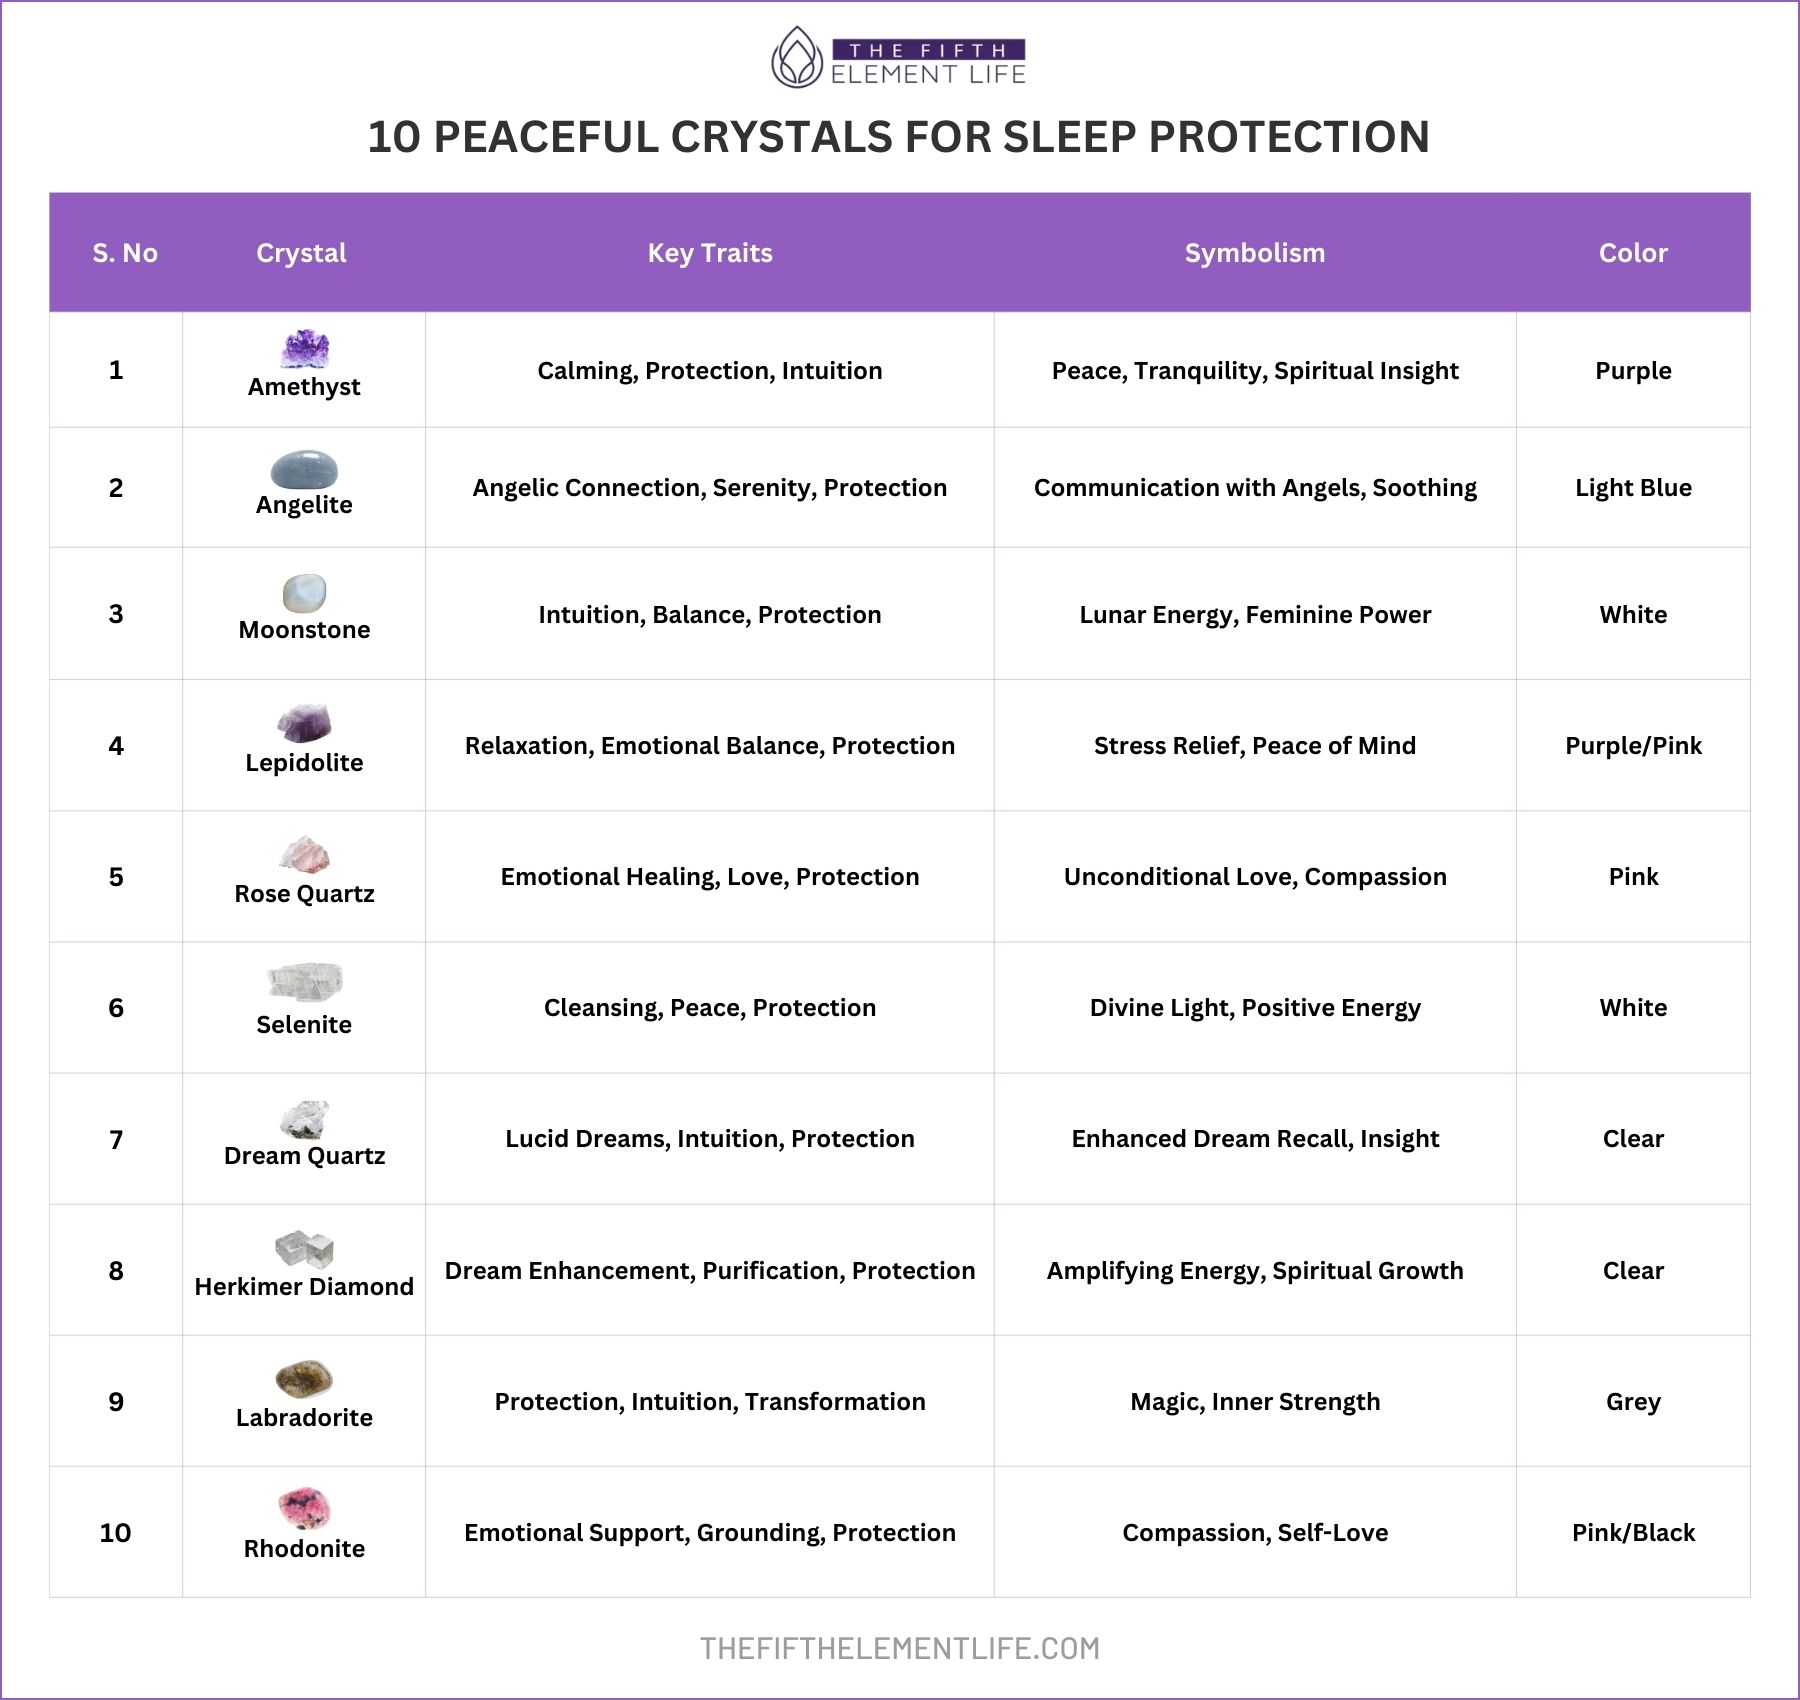 10 Peaceful Crystals for Sleep Protection